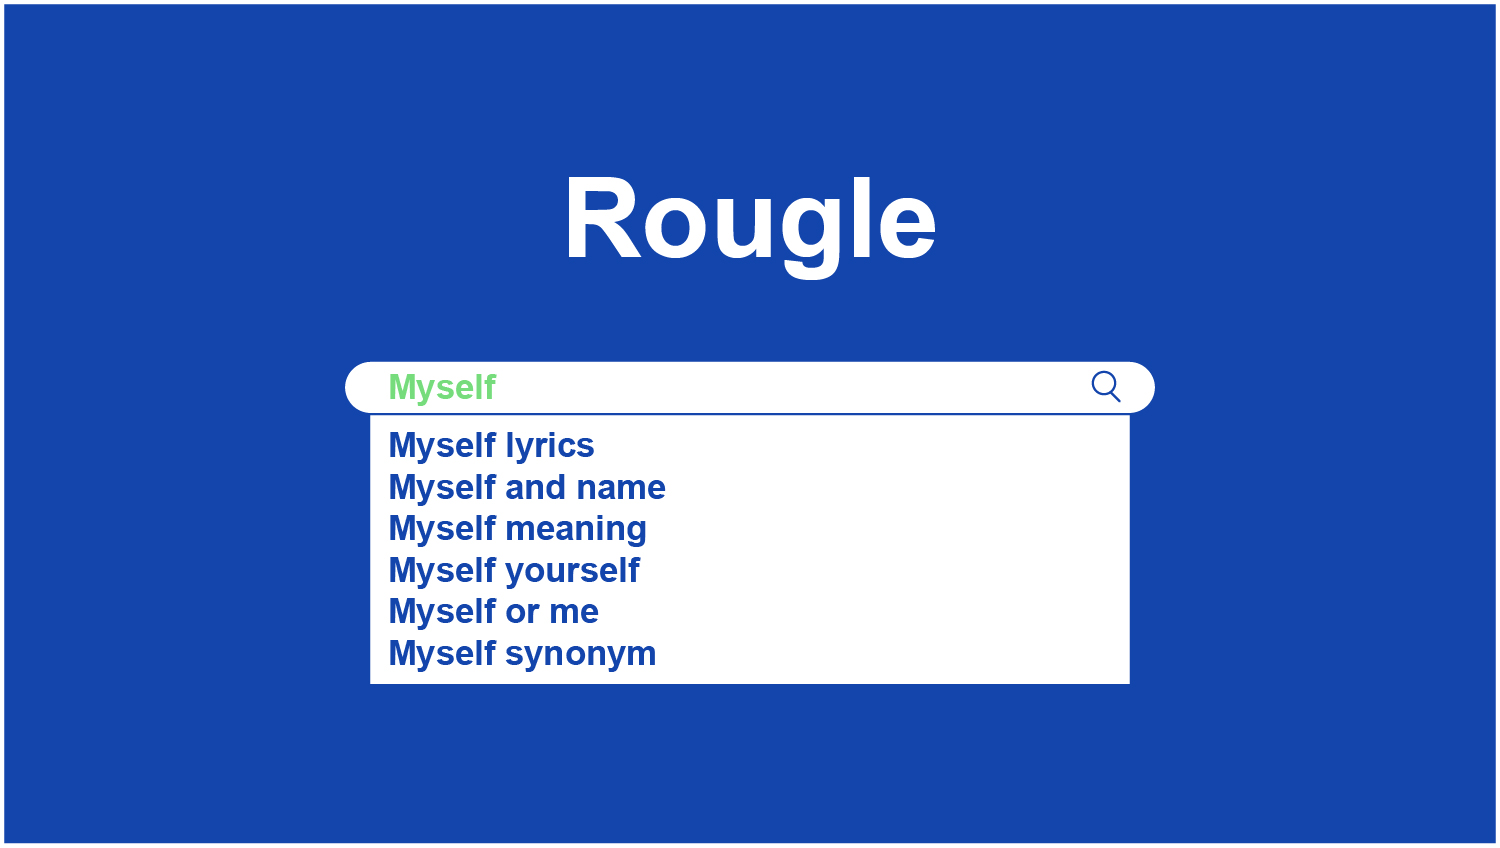 RouteNote Troubleshooters: I want to see myself when I Google my artist name